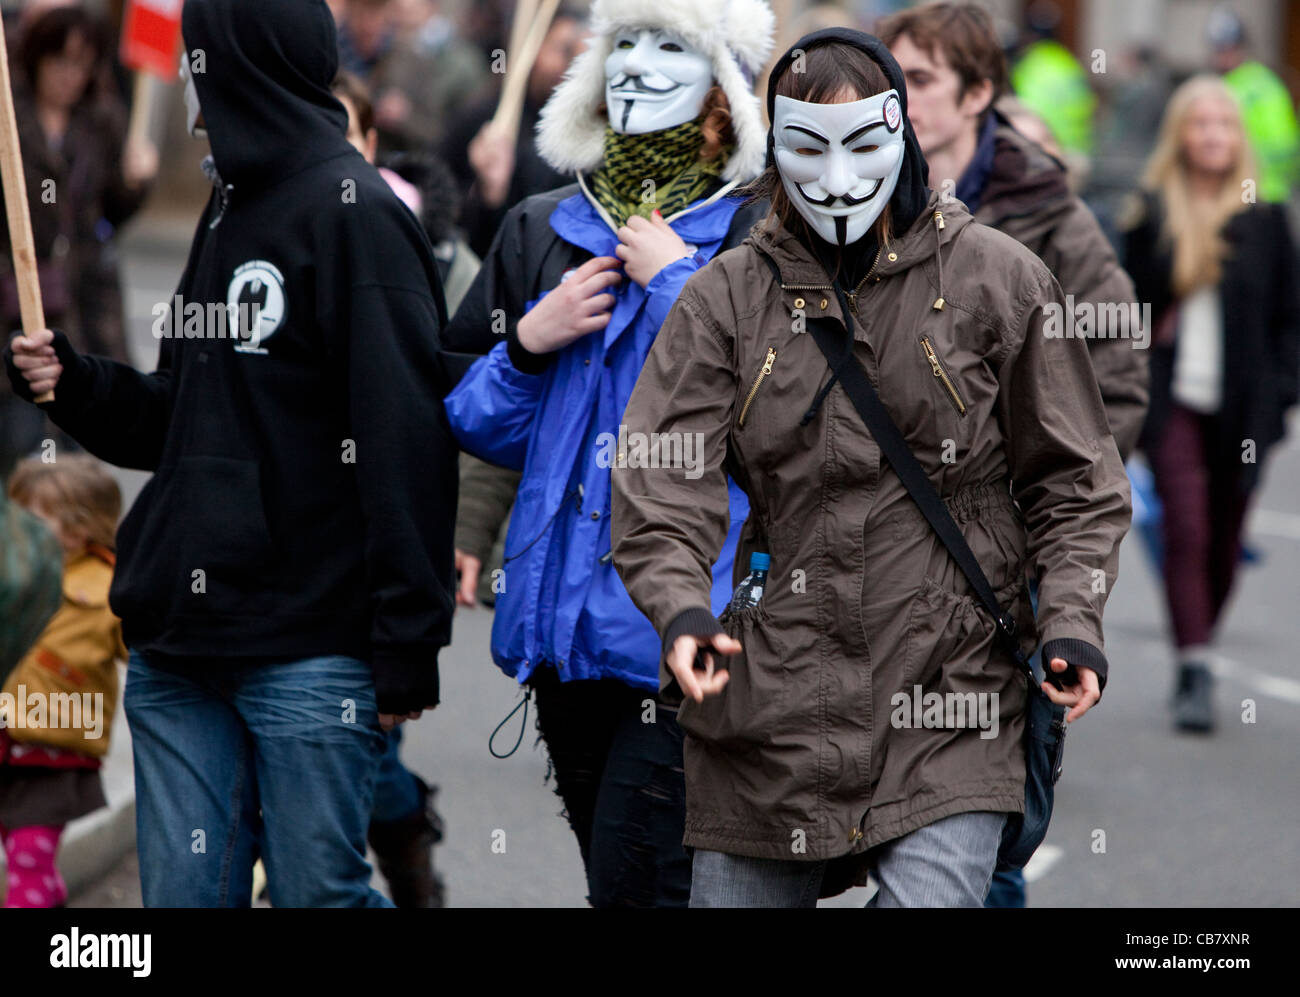 Public sector strike (the unions) protesters wearing V for Vendetta, Guy Fawkes masks, London, England, UK, 2011 Stock Photo